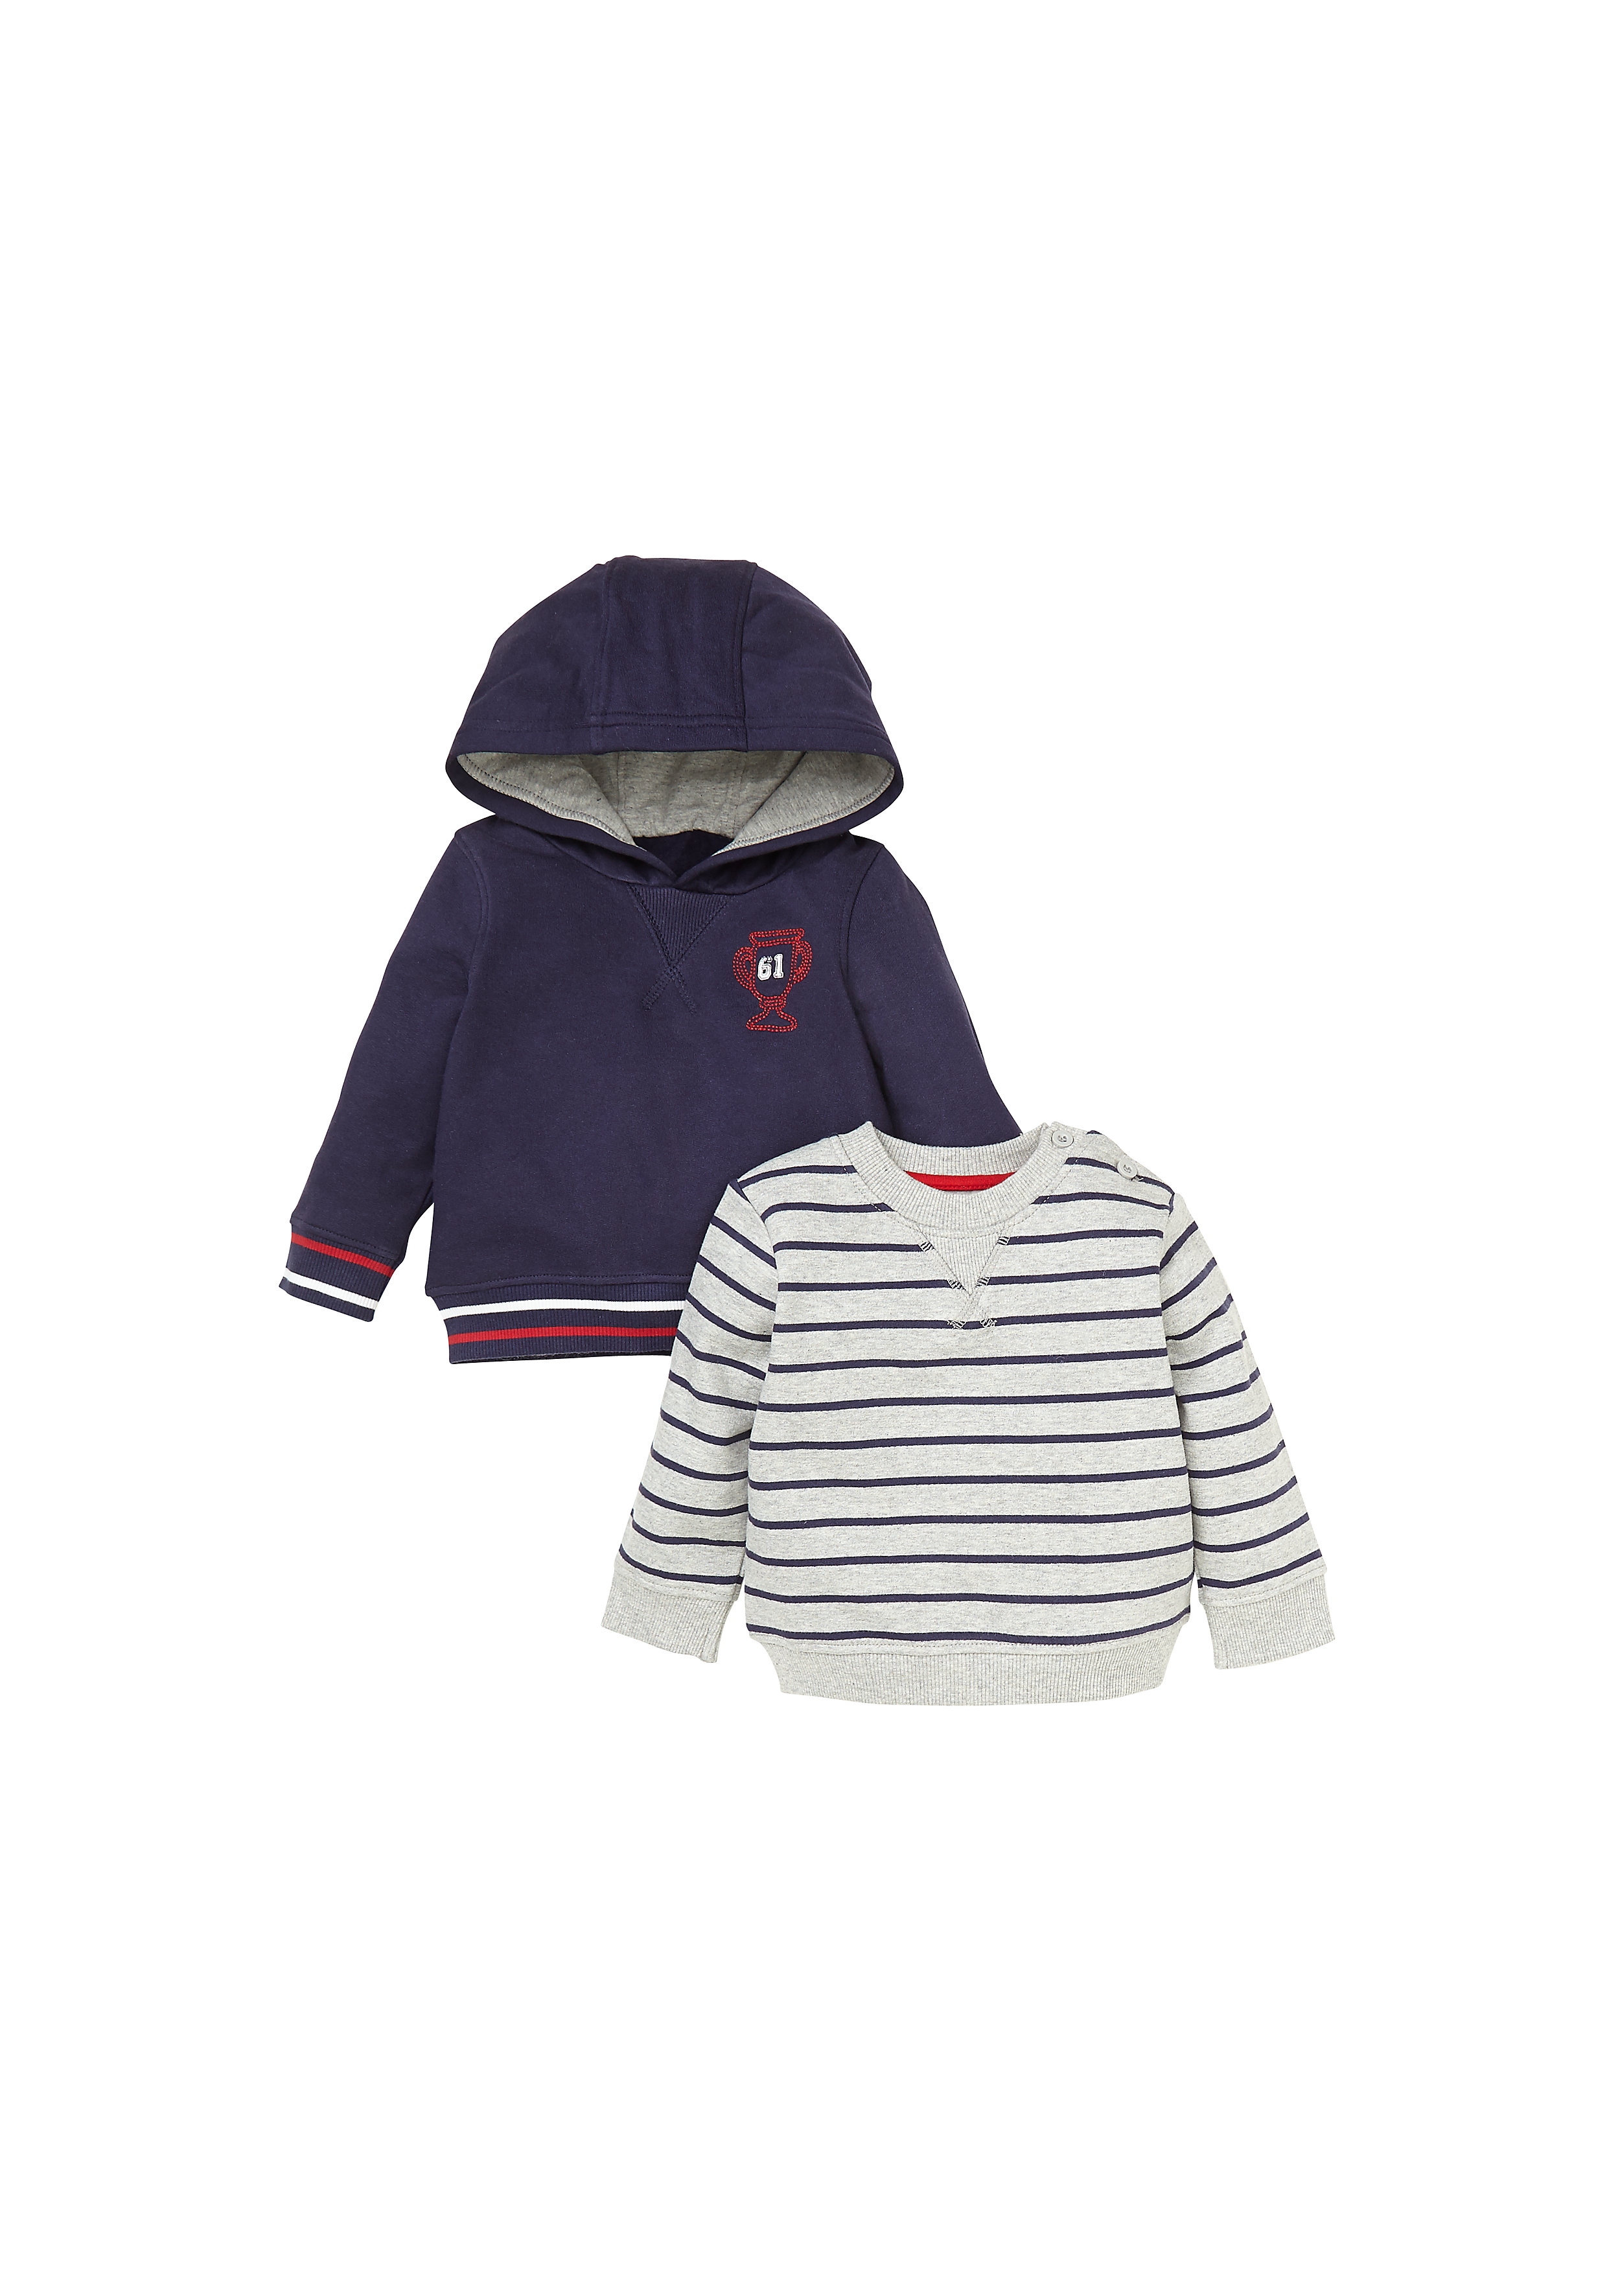 Mothercare | Boys Full Sleeves Sweatshirt Striped - Pack Of 2 - Multicolor